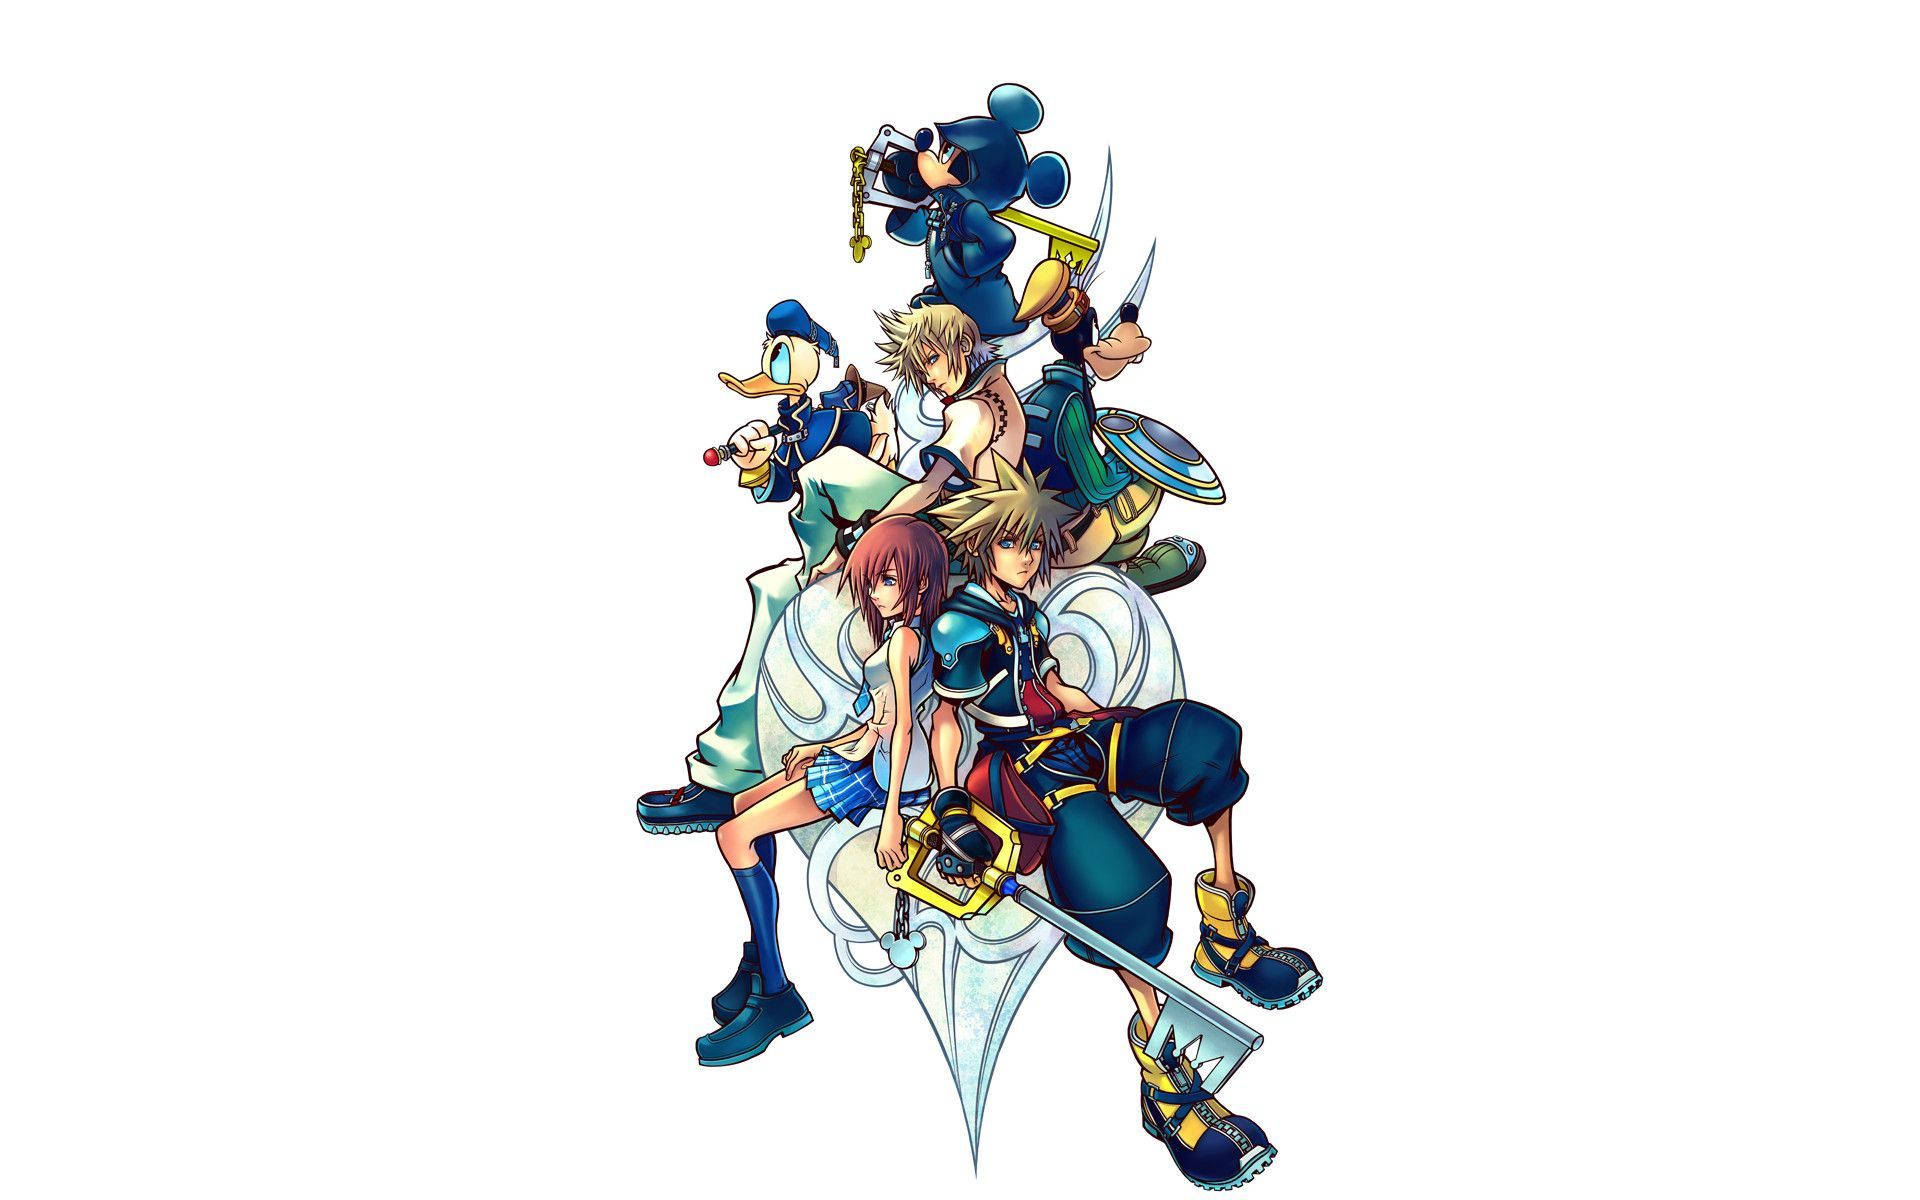 Sora and friends conquering powerful hearts in the Kingdom Hearts universe Wallpaper